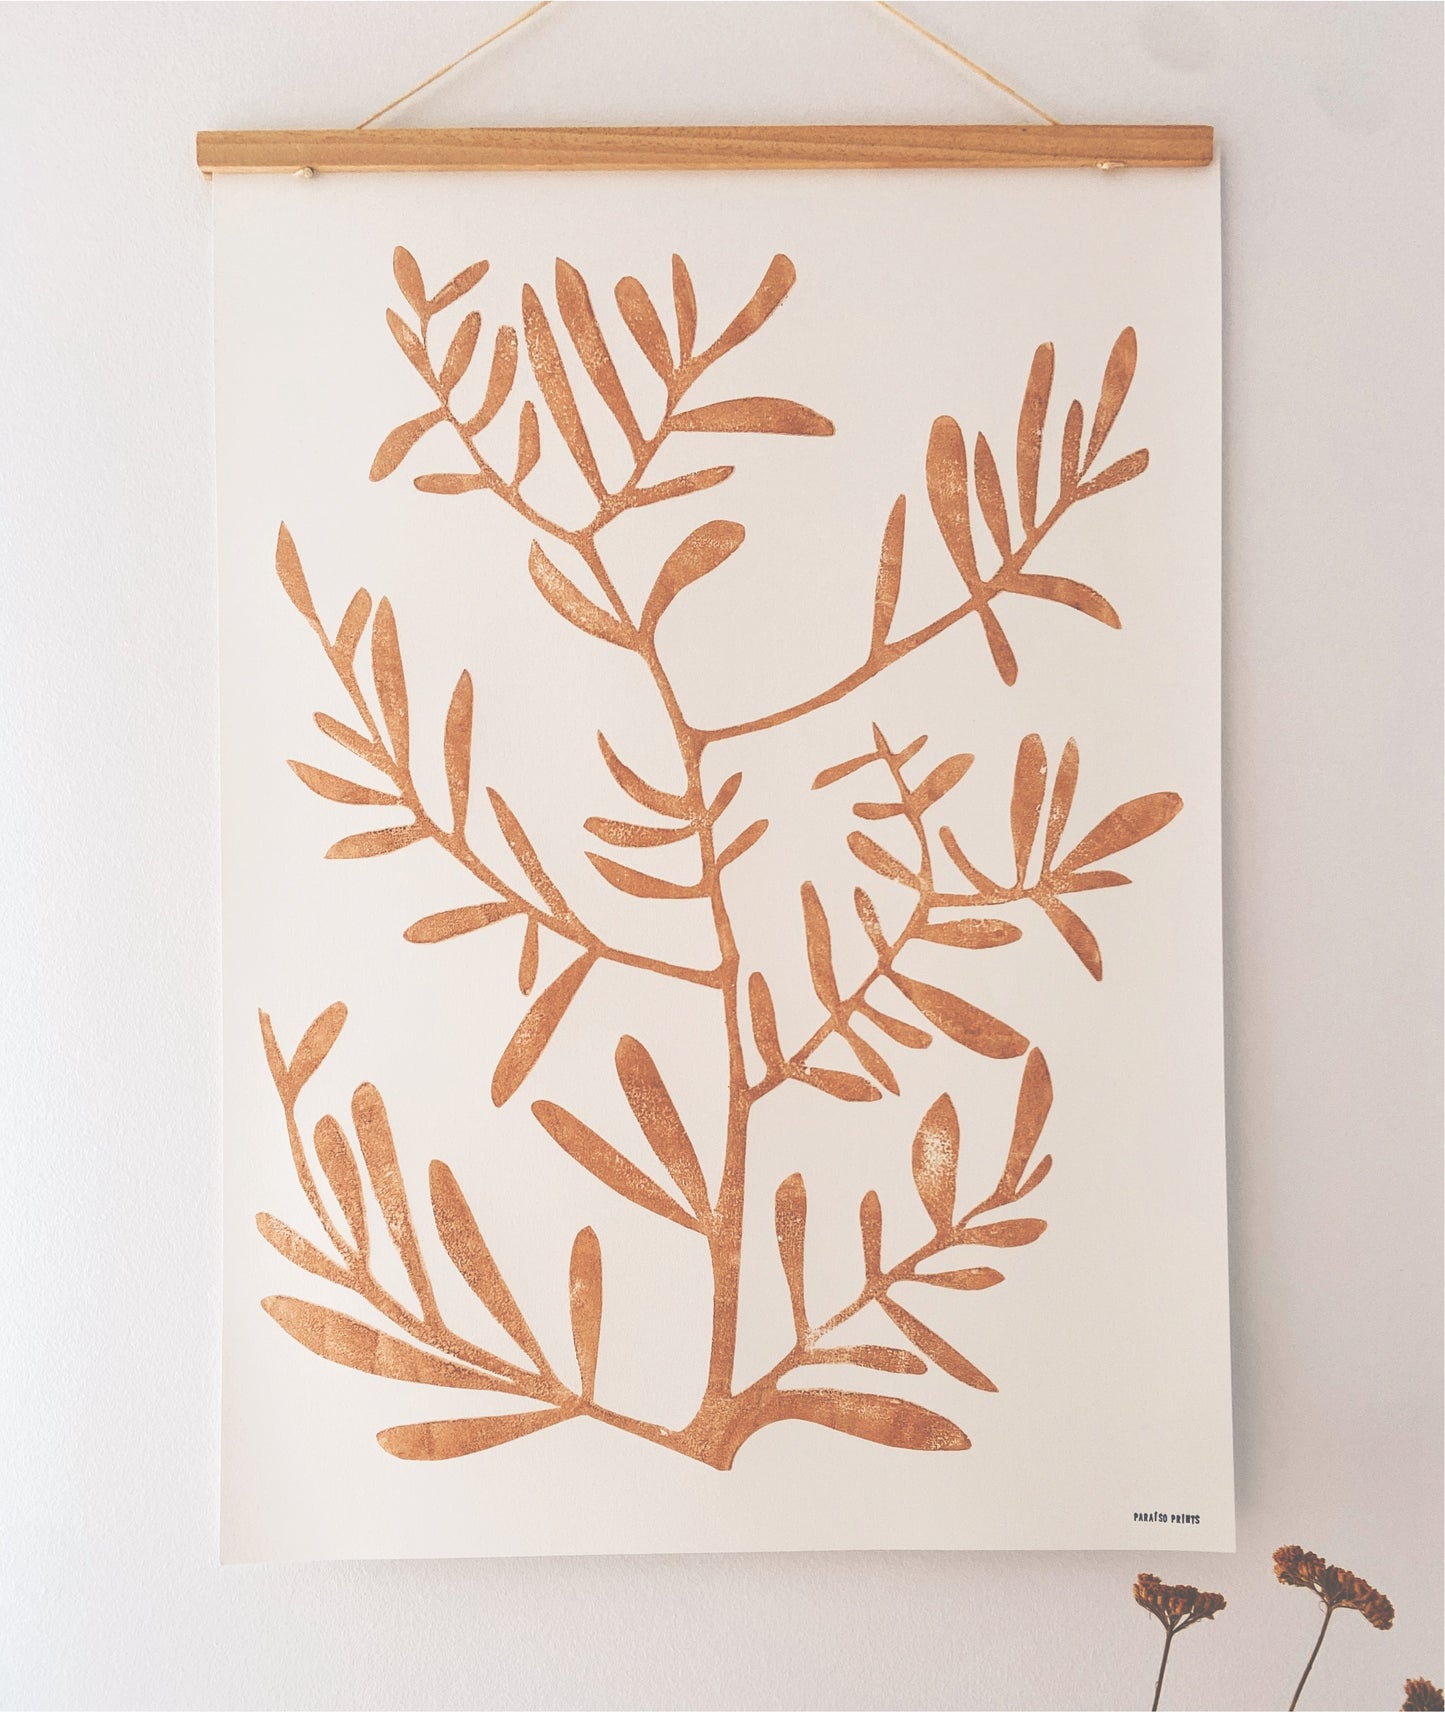 Olive tree art for sale | Olive tree drawing/prints - Paraiso prints